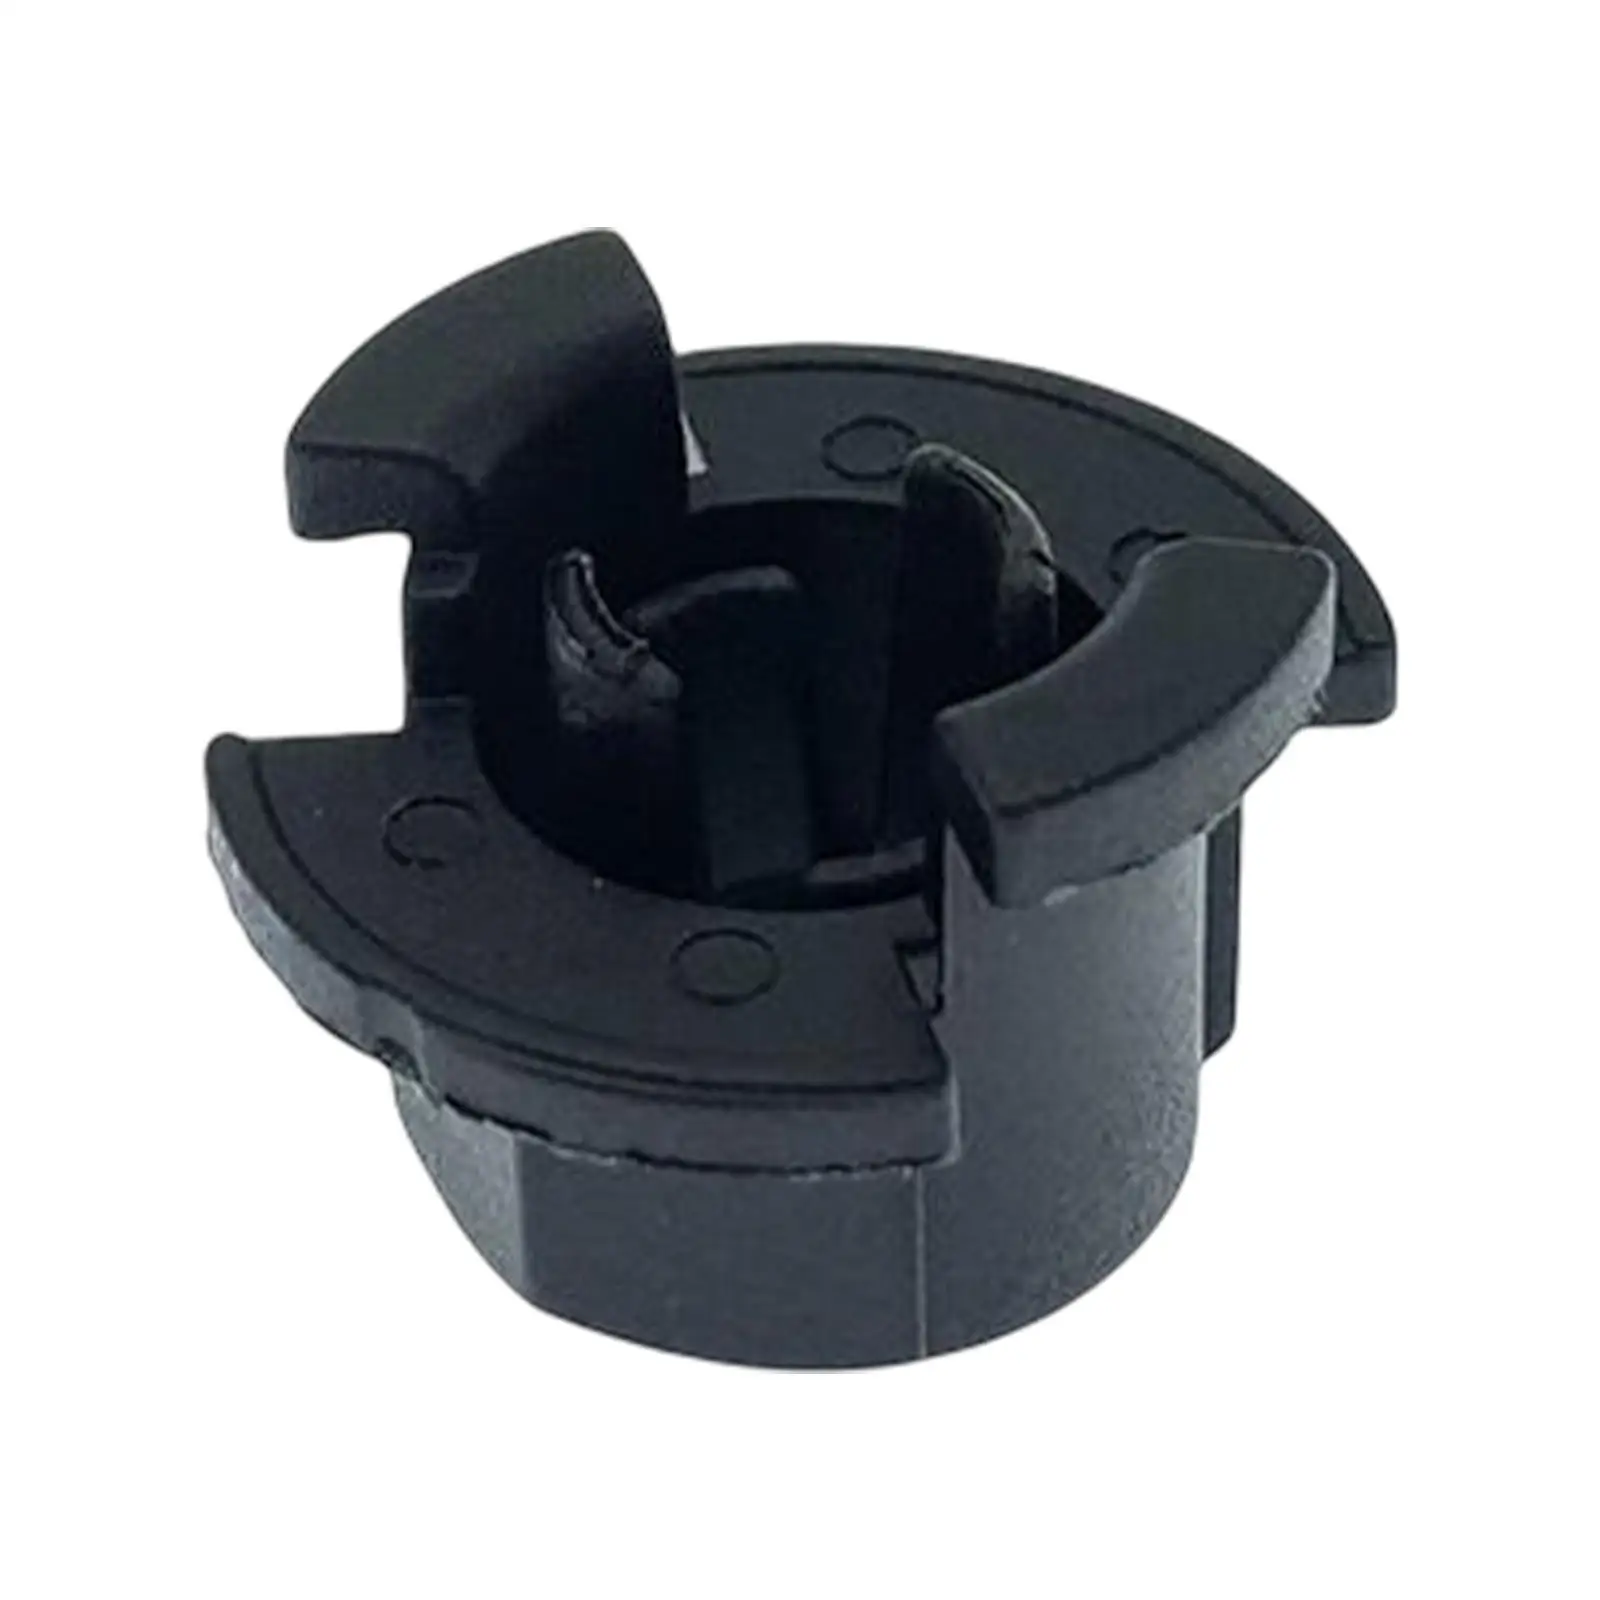 Vehicle Radar Alignment Mounting Clip 36806-Tla-A01 Replacement Easy